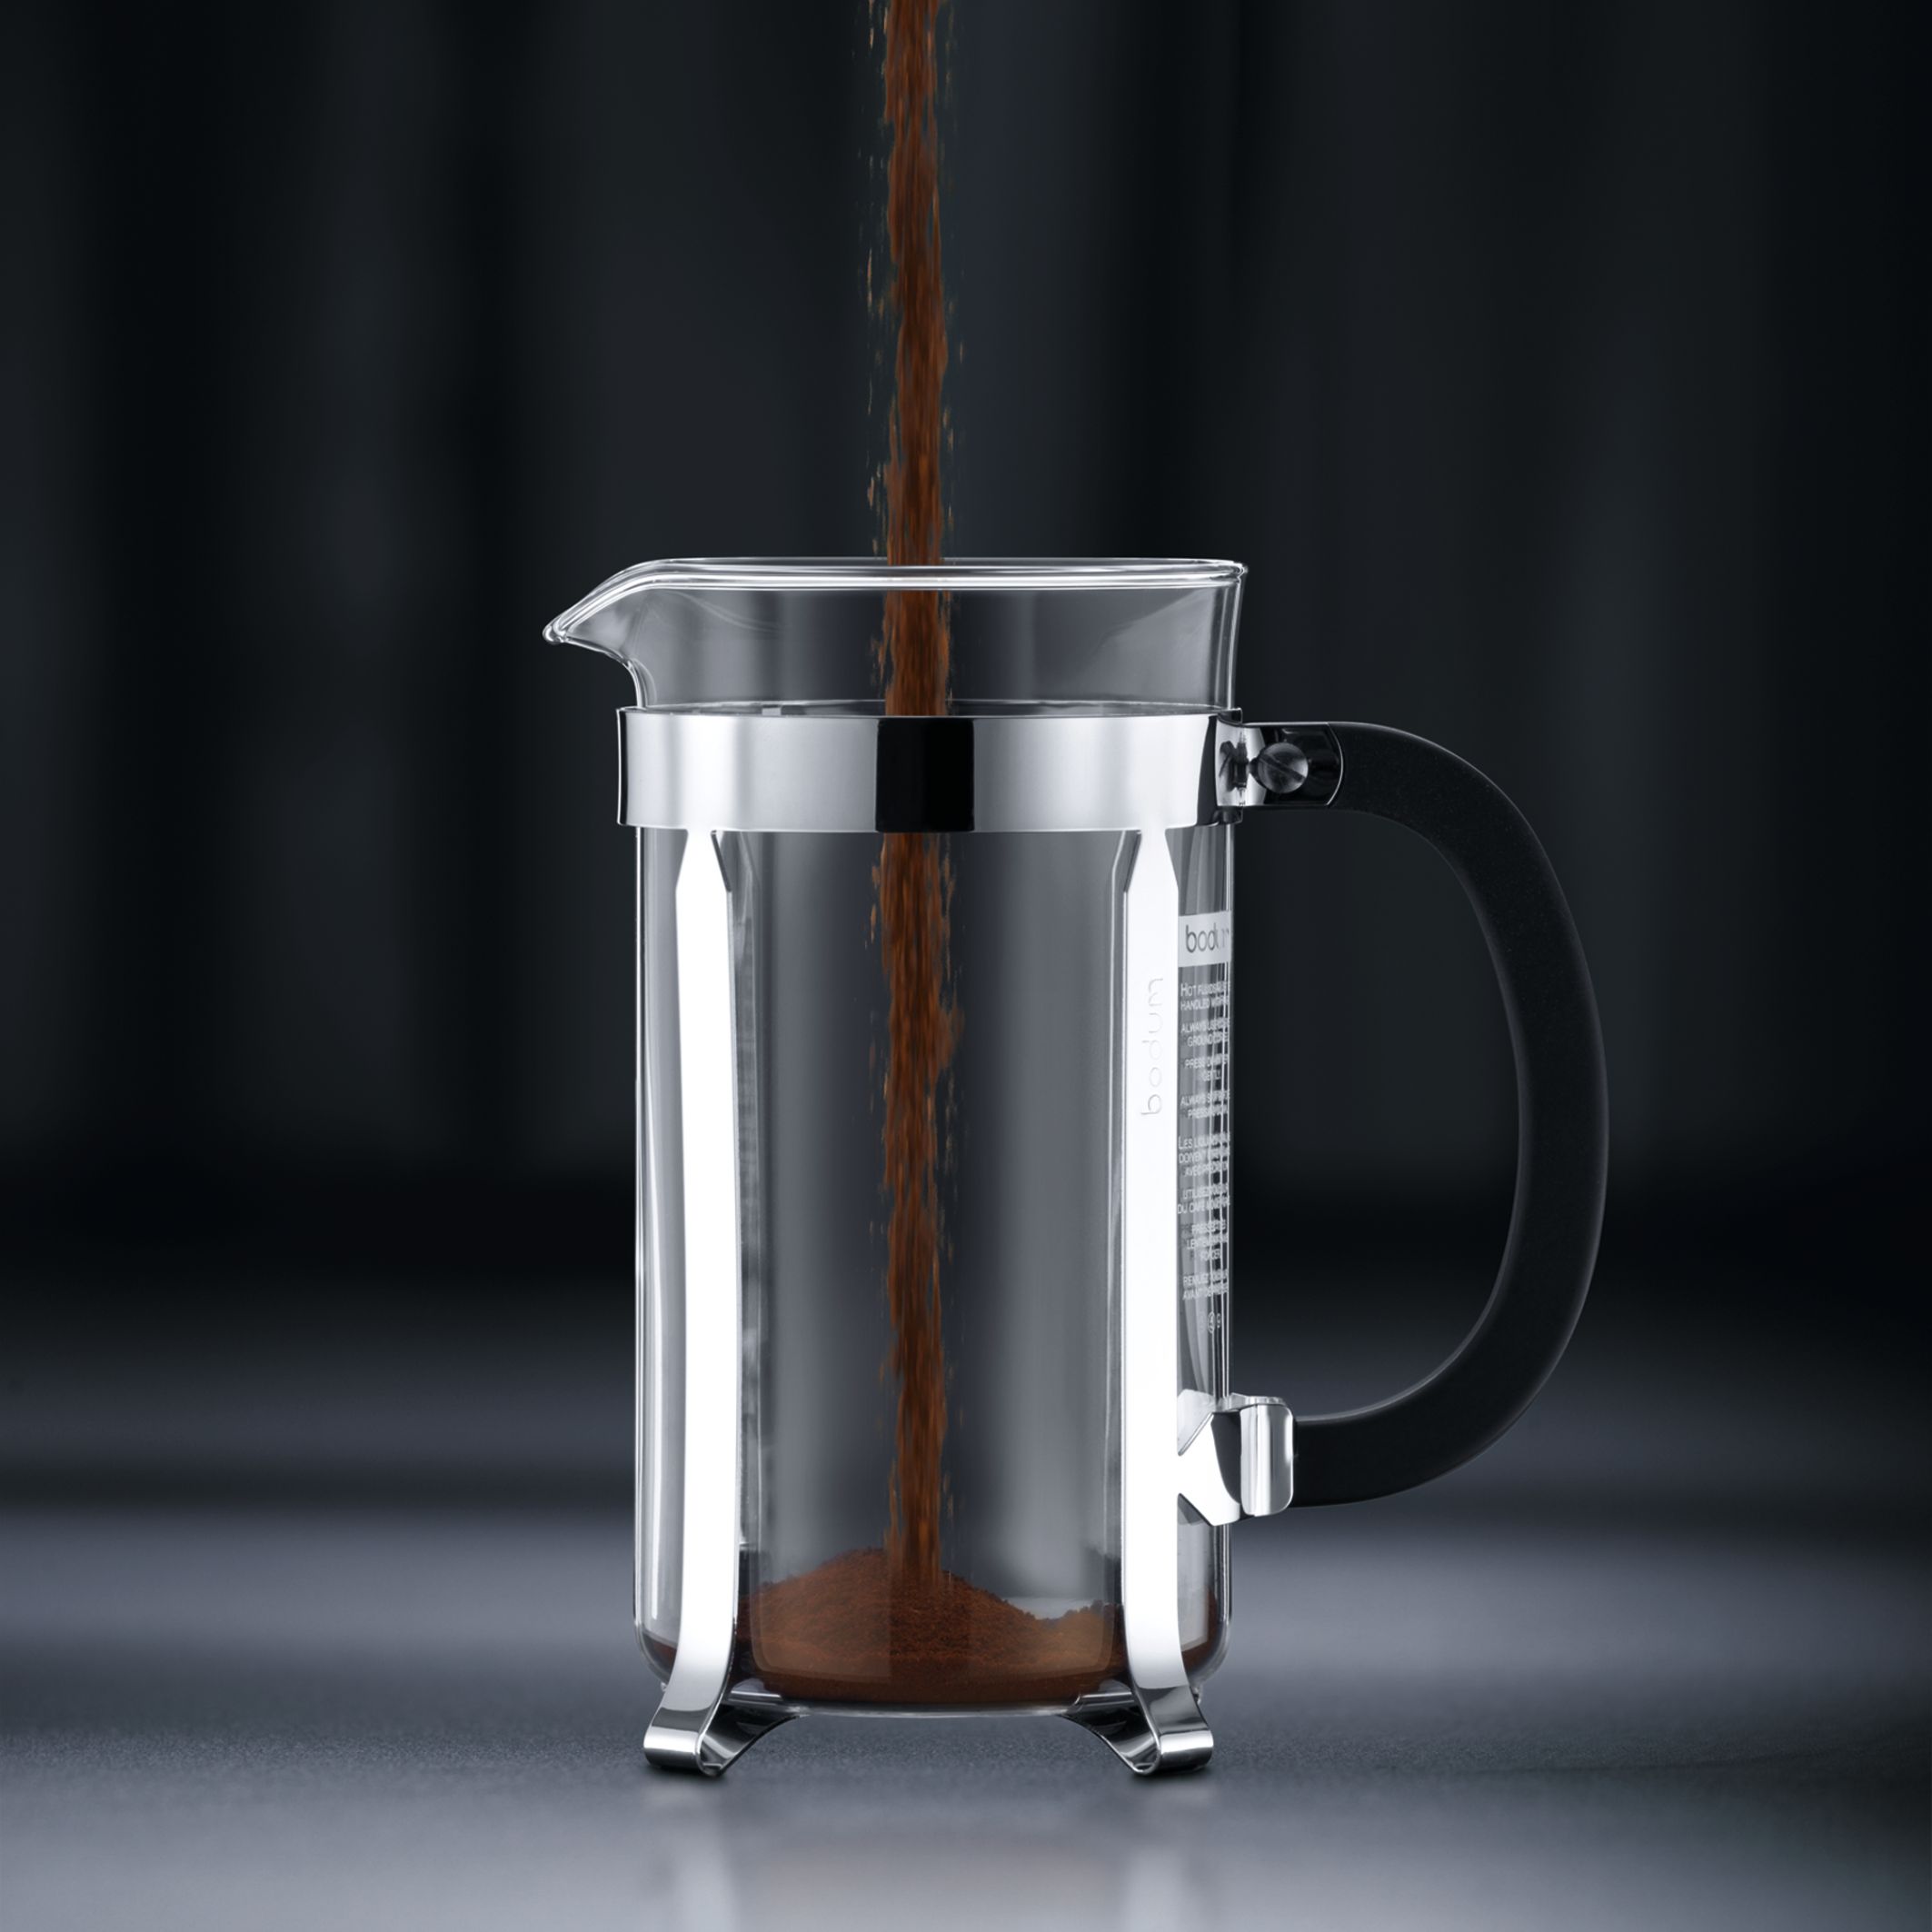 BODUM Chambord French Press Coffee Maker, 51 Ounce, Stainless Steel - image 5 of 7